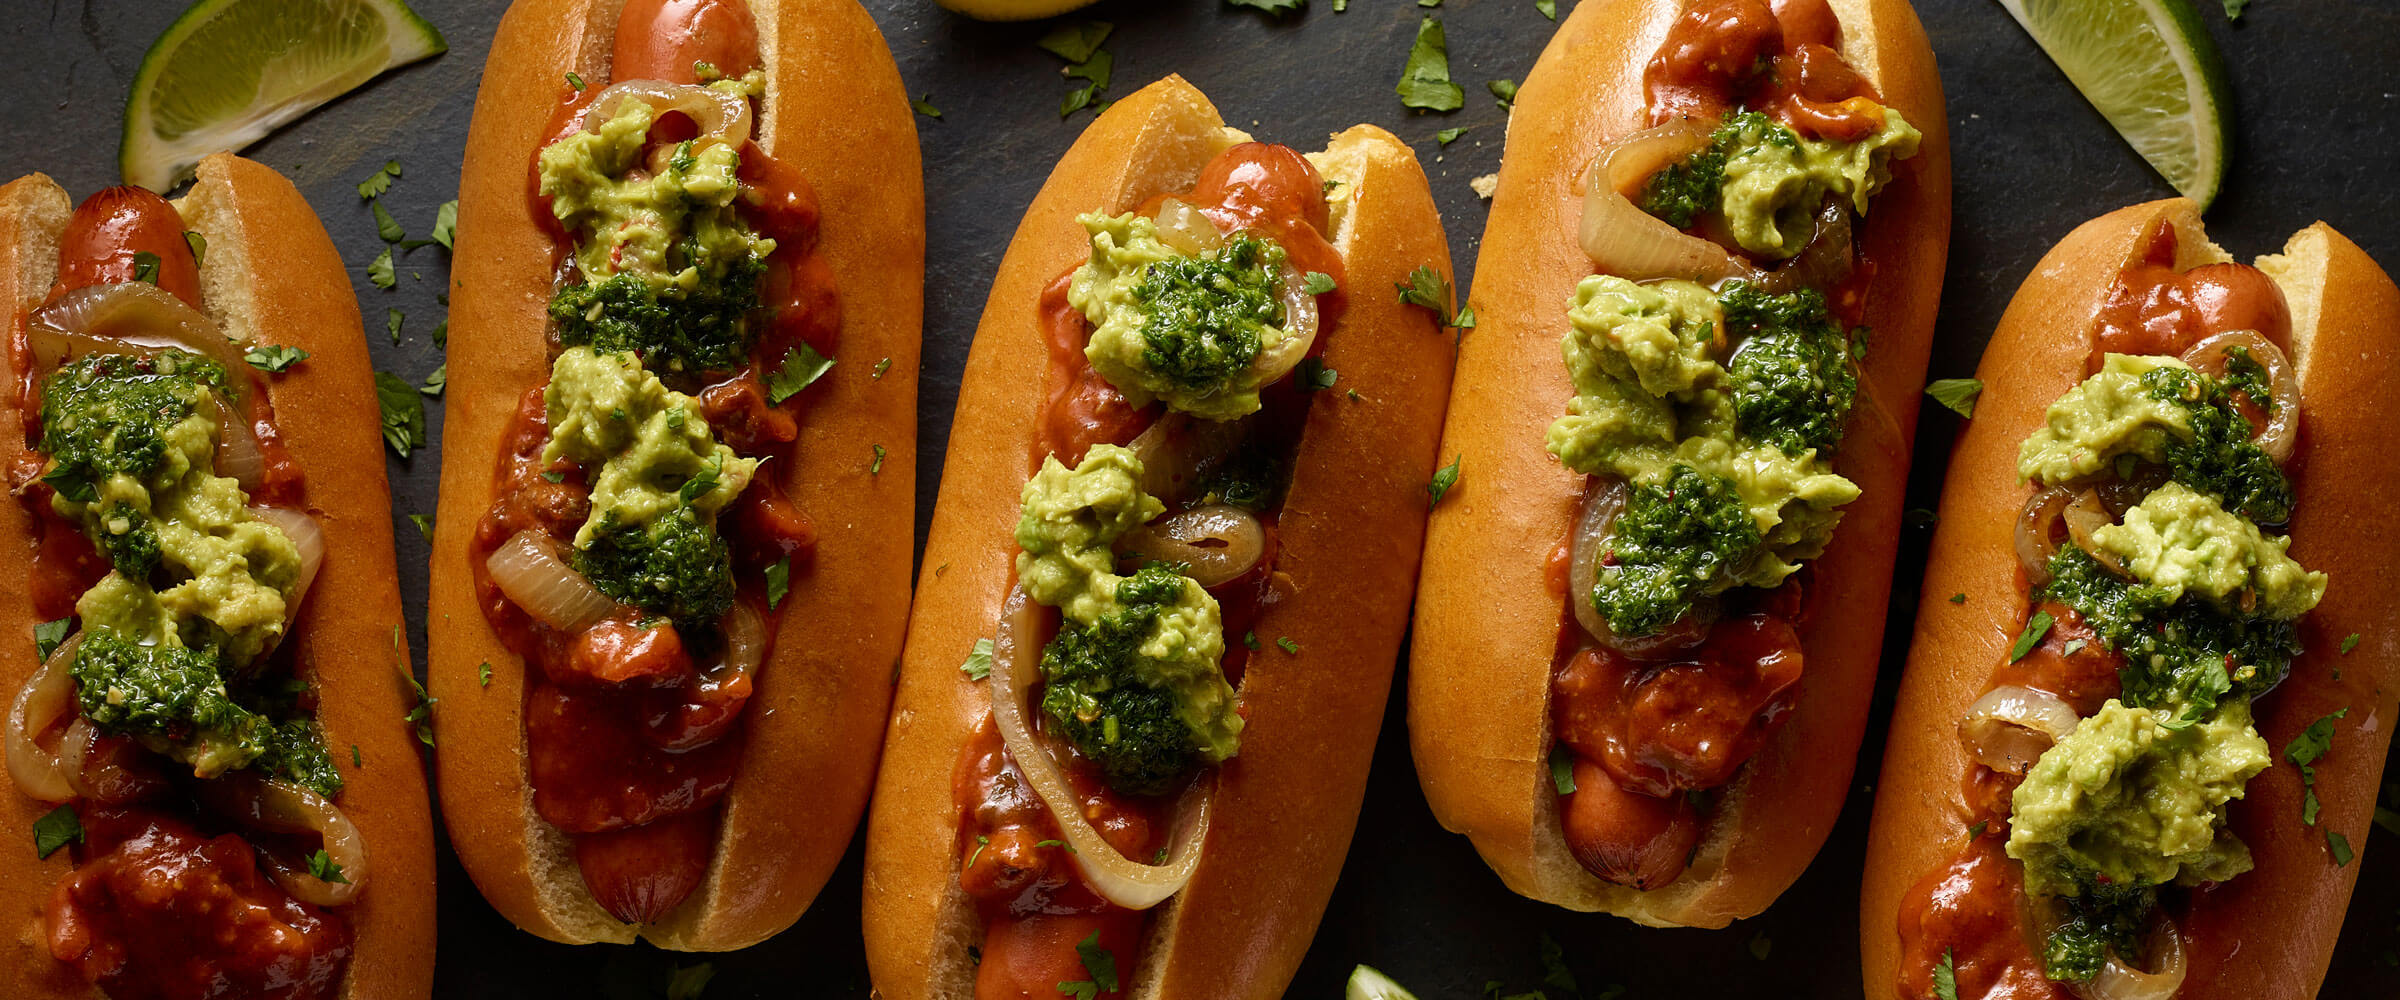 Chili Green Dogs topped with broccoli and guacamole with lime wedges